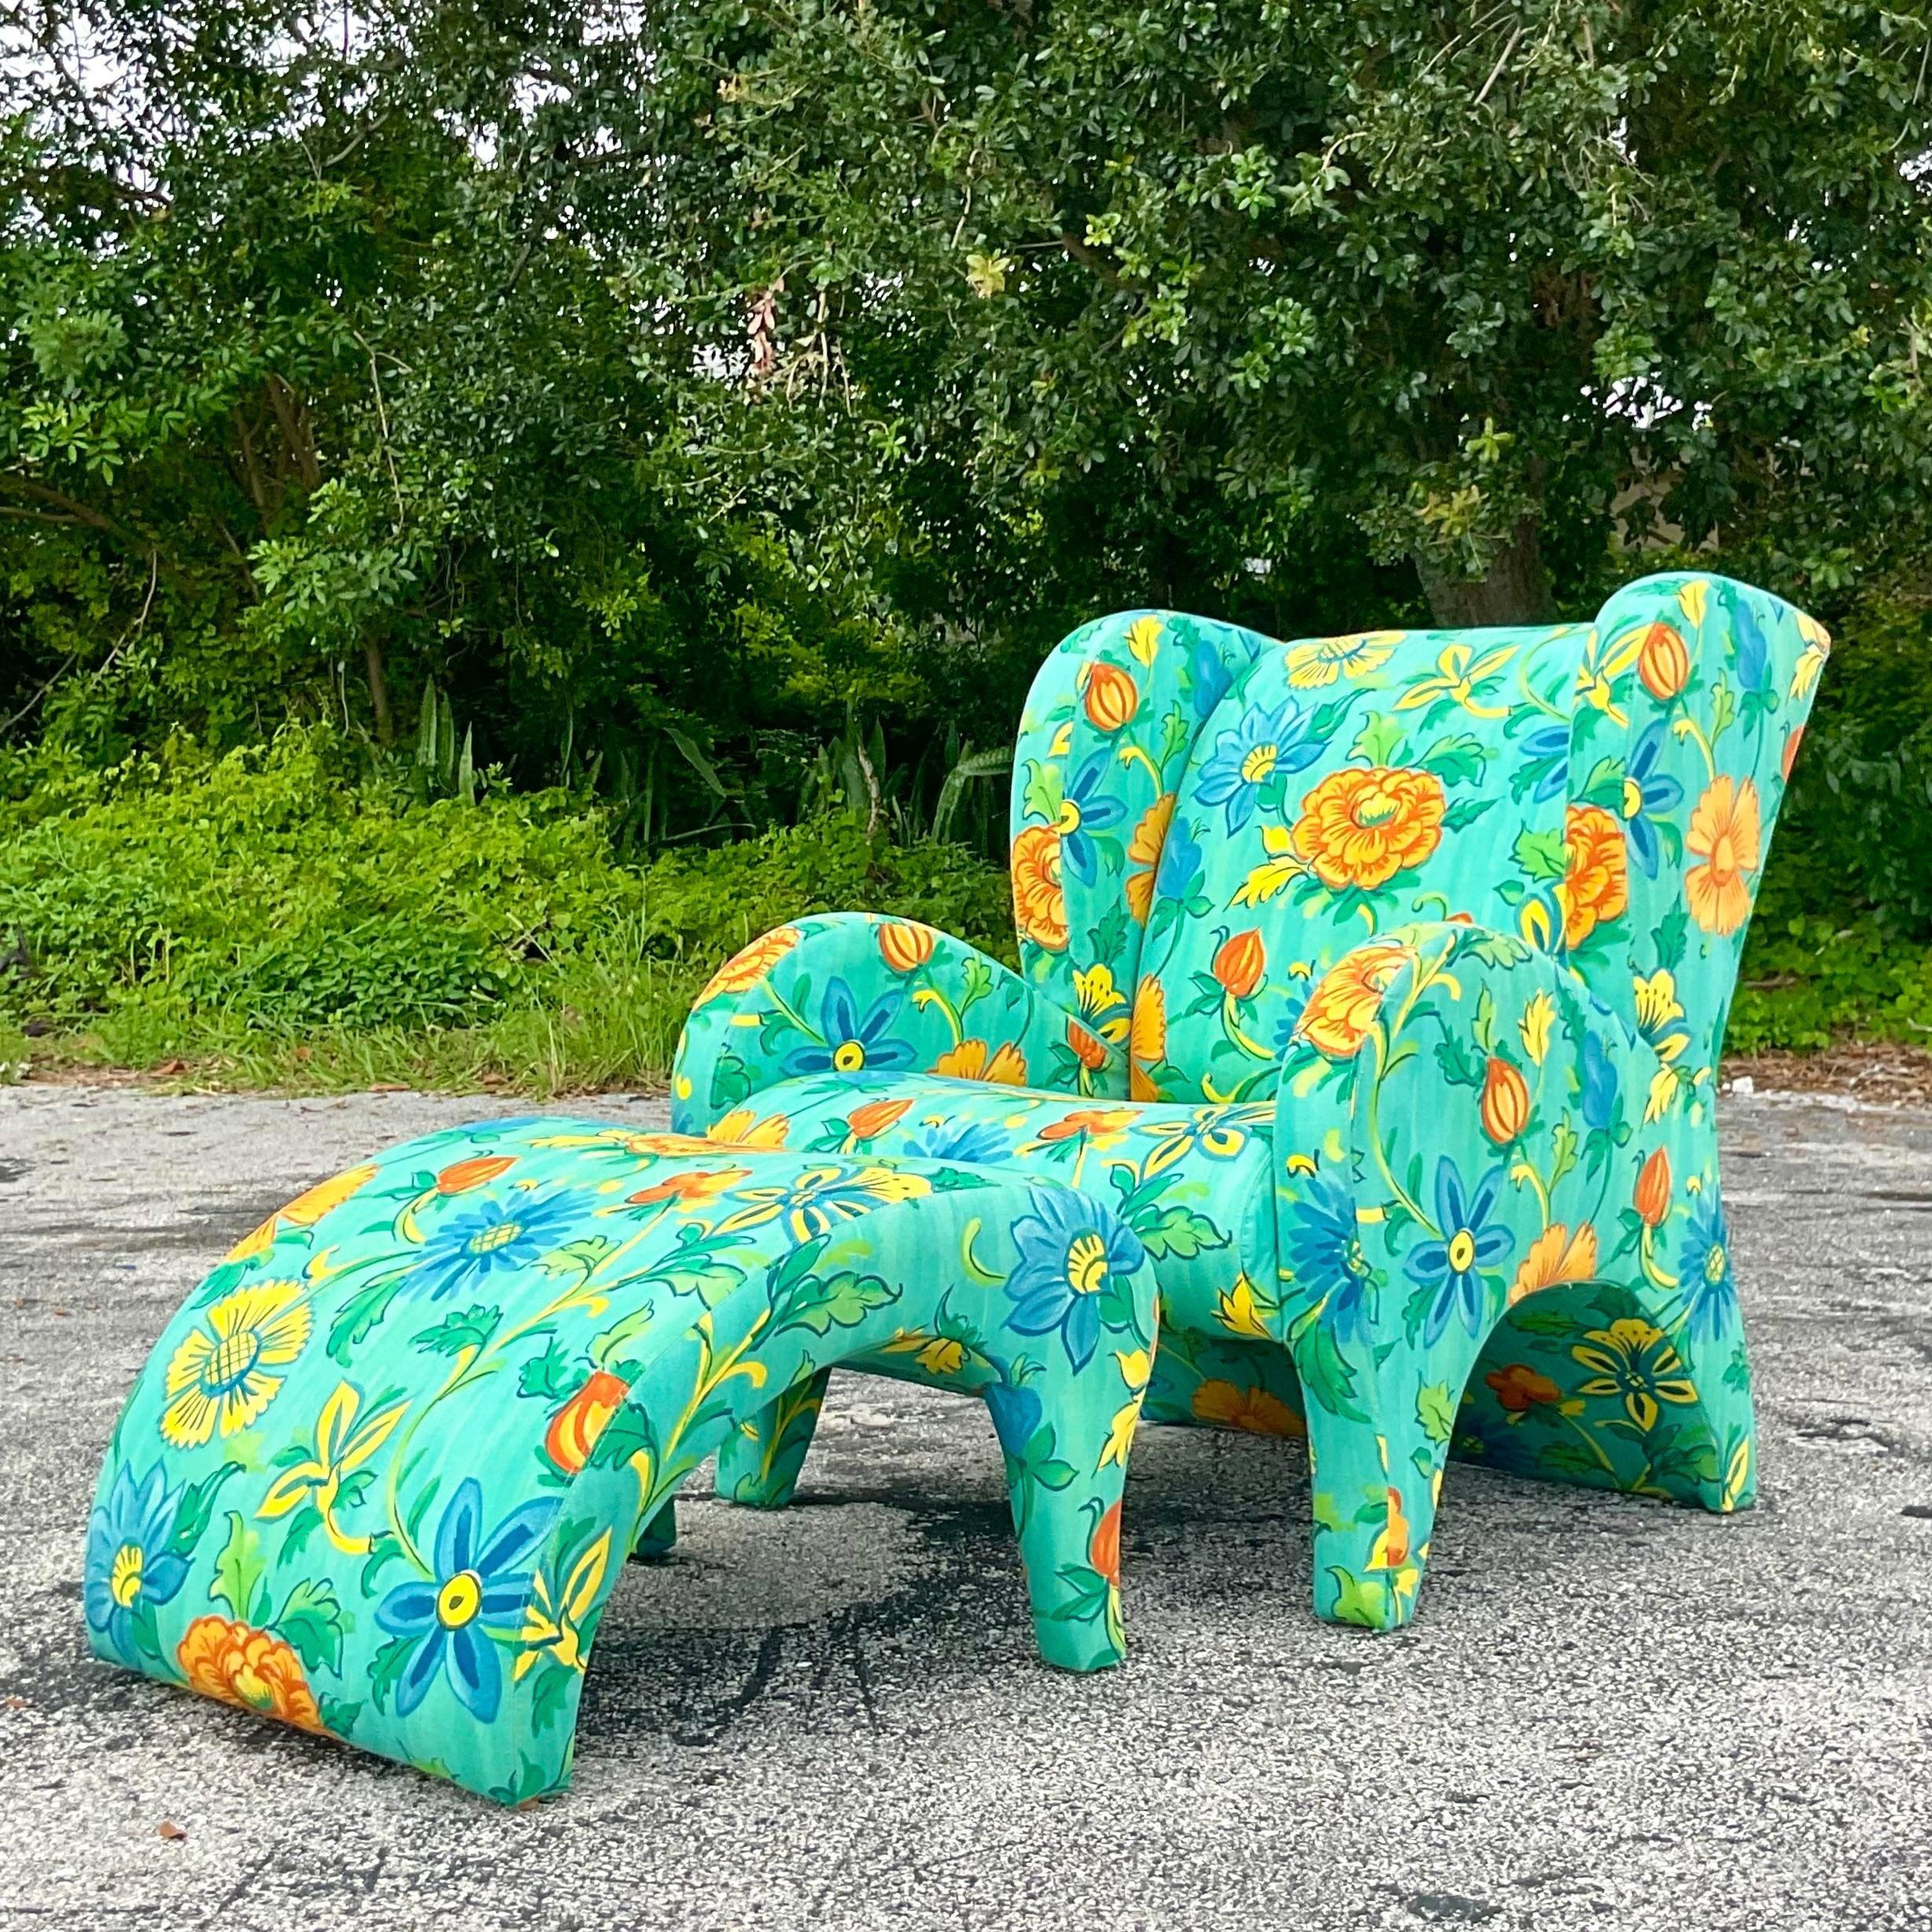 A fabulous vintage Boho chair and ottoman set. Made by the iconic Thayer Coggin group and tagged on the bottom. A beautiful bright floral print on a Postmodern shape. Acquired from a Palm Beach estate.

Ottoman dimensions 25x24x15.5